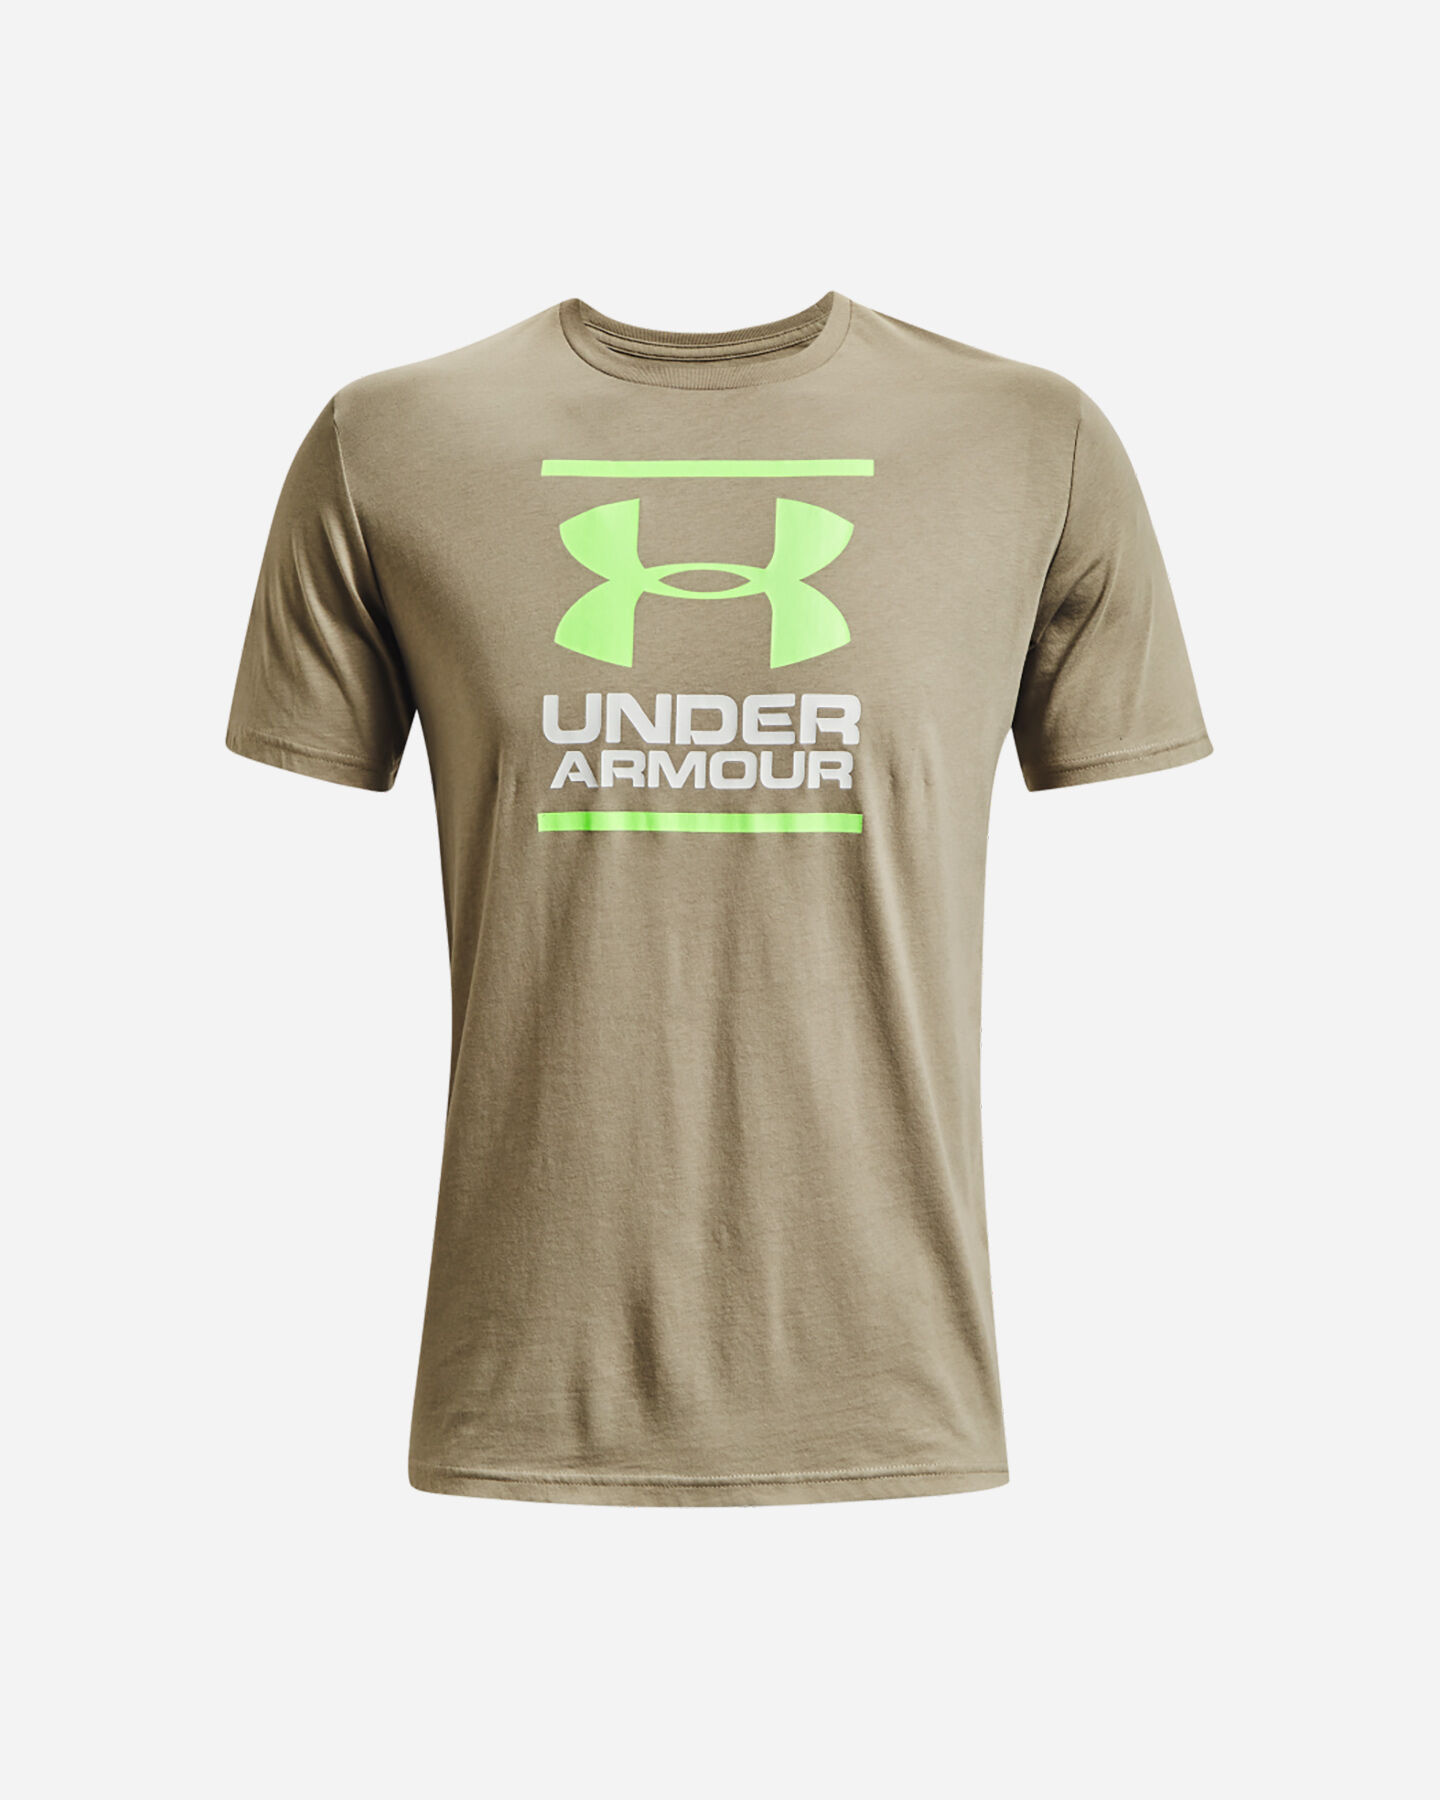  T-Shirt training UNDER ARMOUR FOUNDATION M S5389690|0037|SM scatto 0